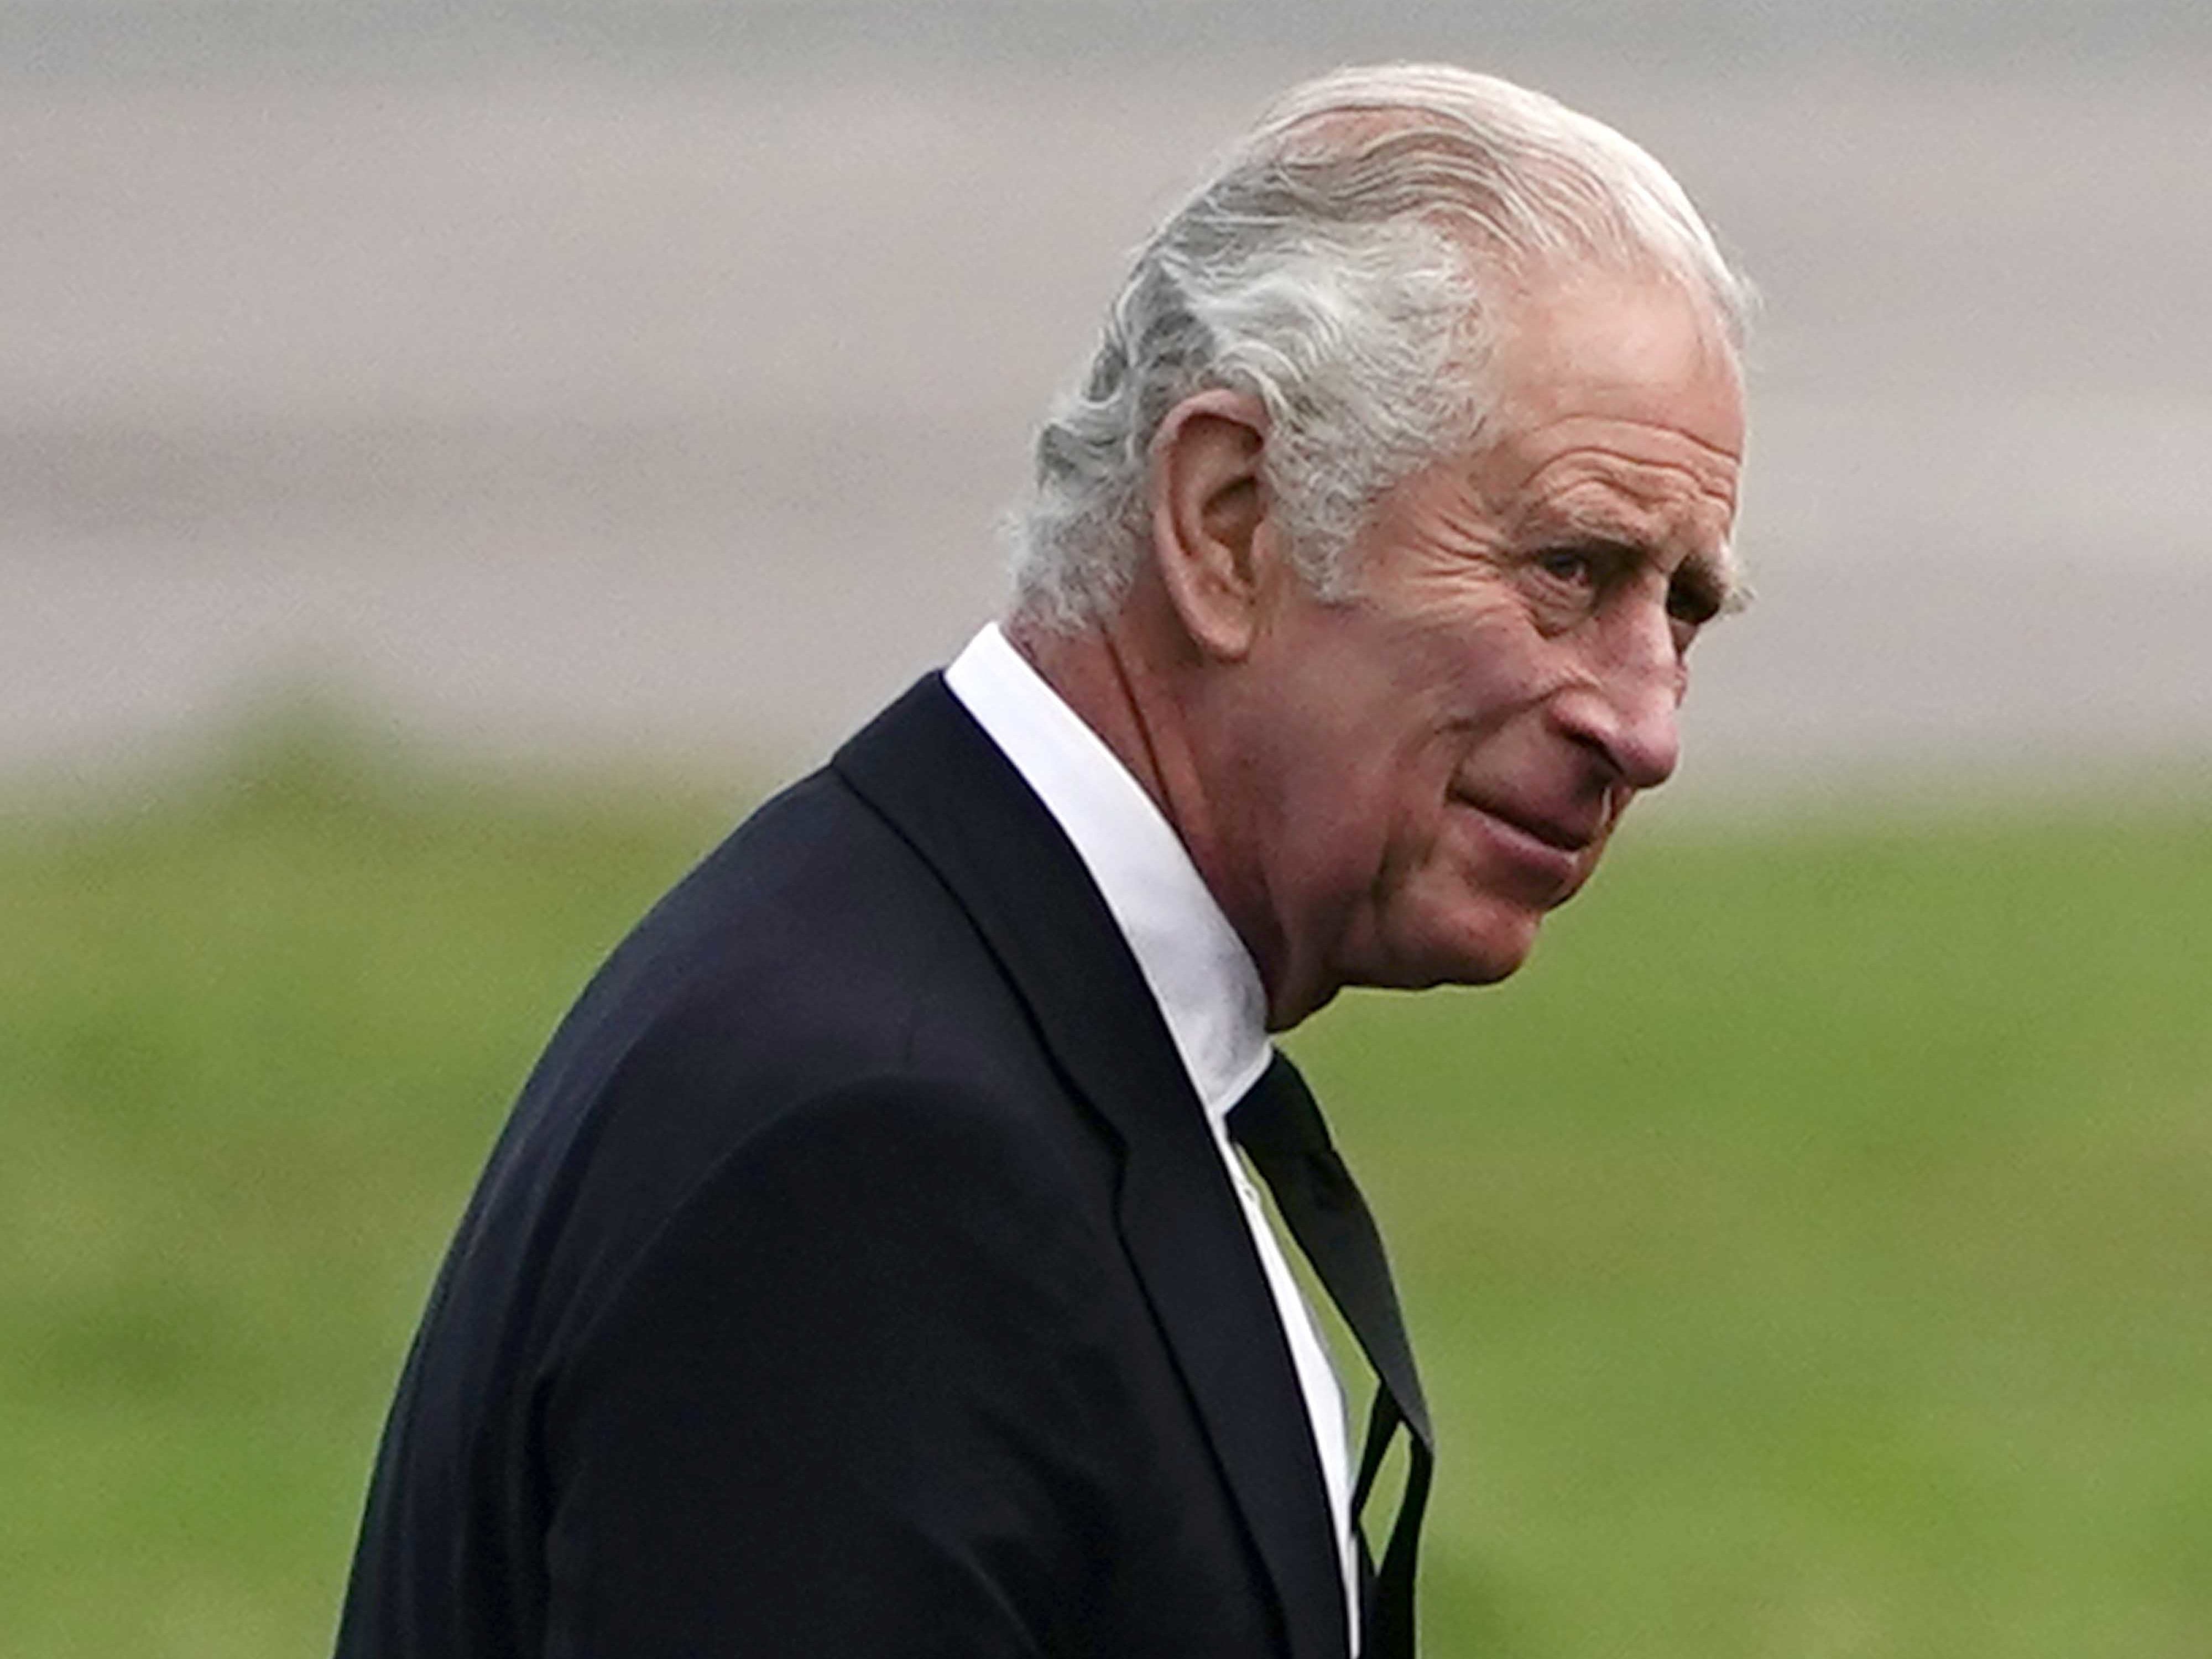 King Charles III shook hands and spoke with three members of staff before climbing on board flight to London